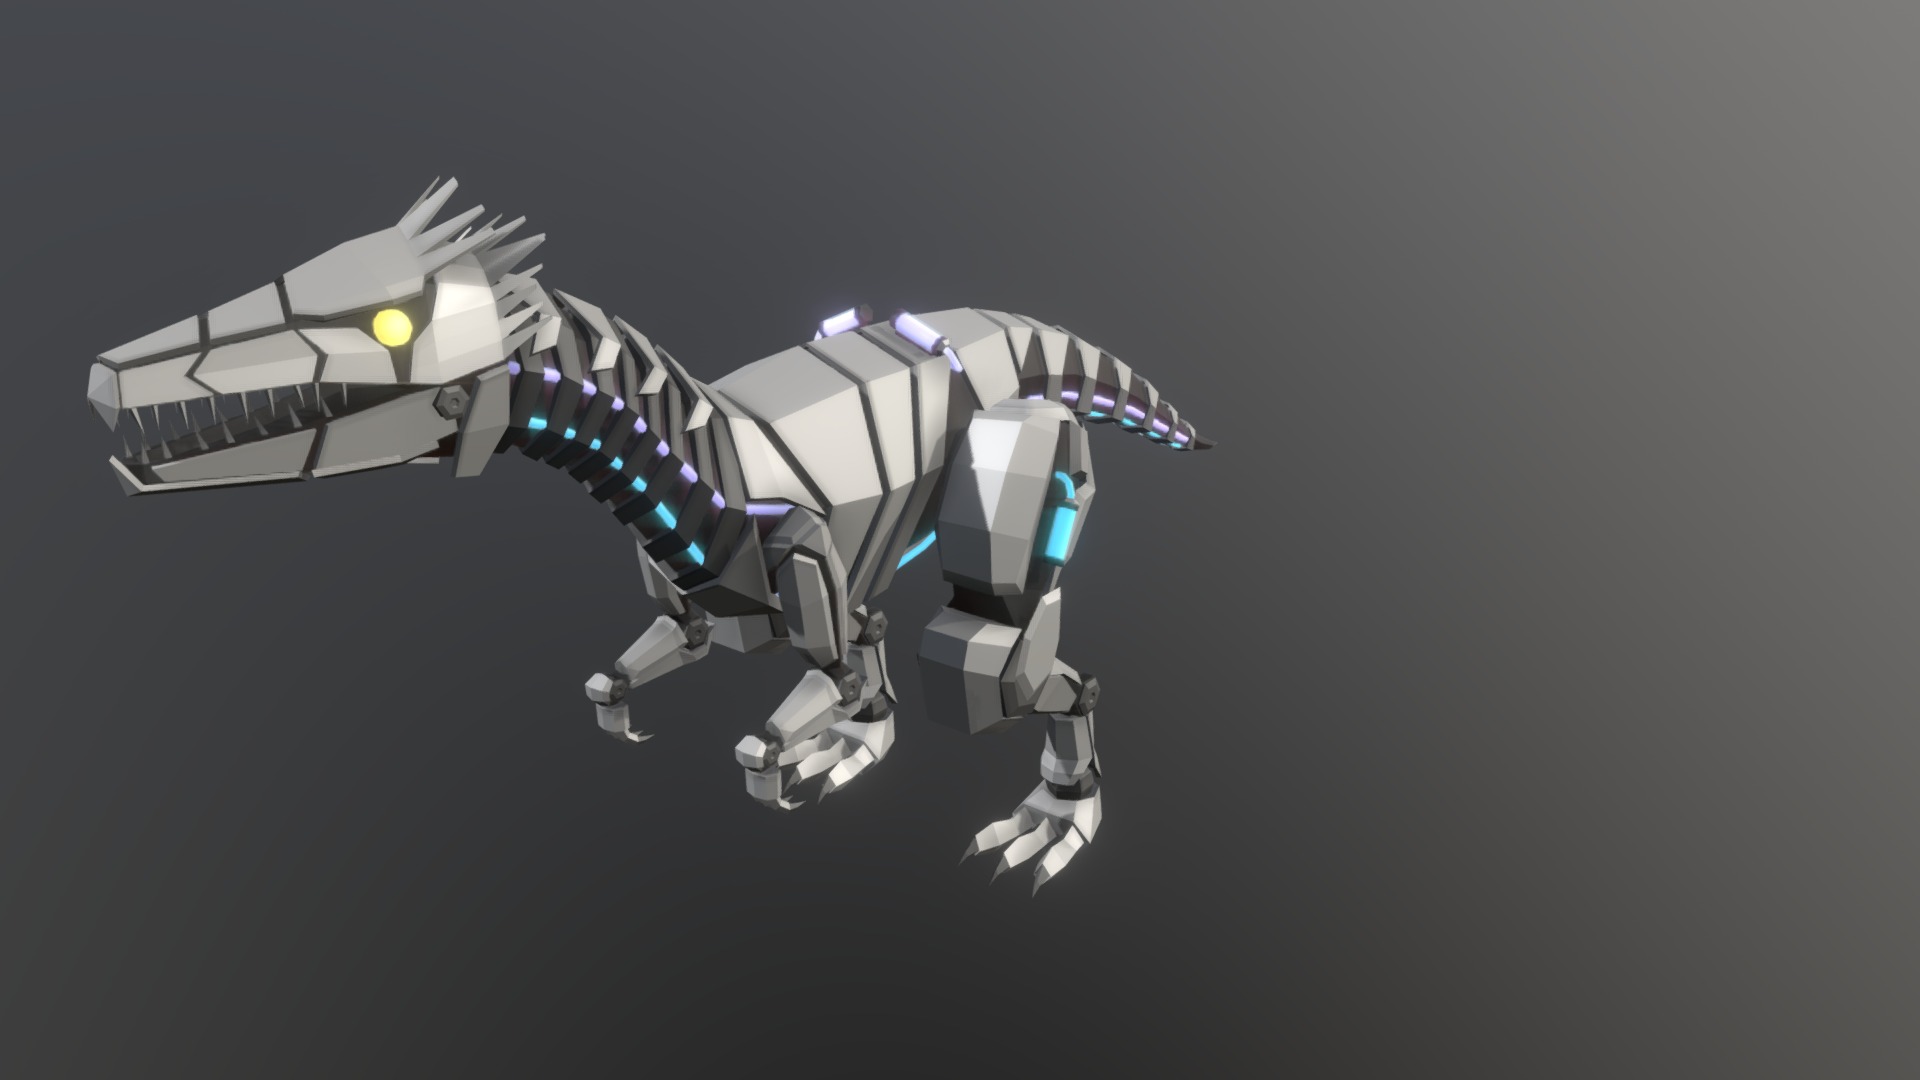 A tiny bit late, but it’s done! A robot dinosaur for the mechanical monthly challenge. I believe this is my most detailed lowpoly character model so far and I am actually quite proud of this, liking how it turned out! - MC22 - Mechanical - Robot dinosaur - 3D model by Daragos 3d model